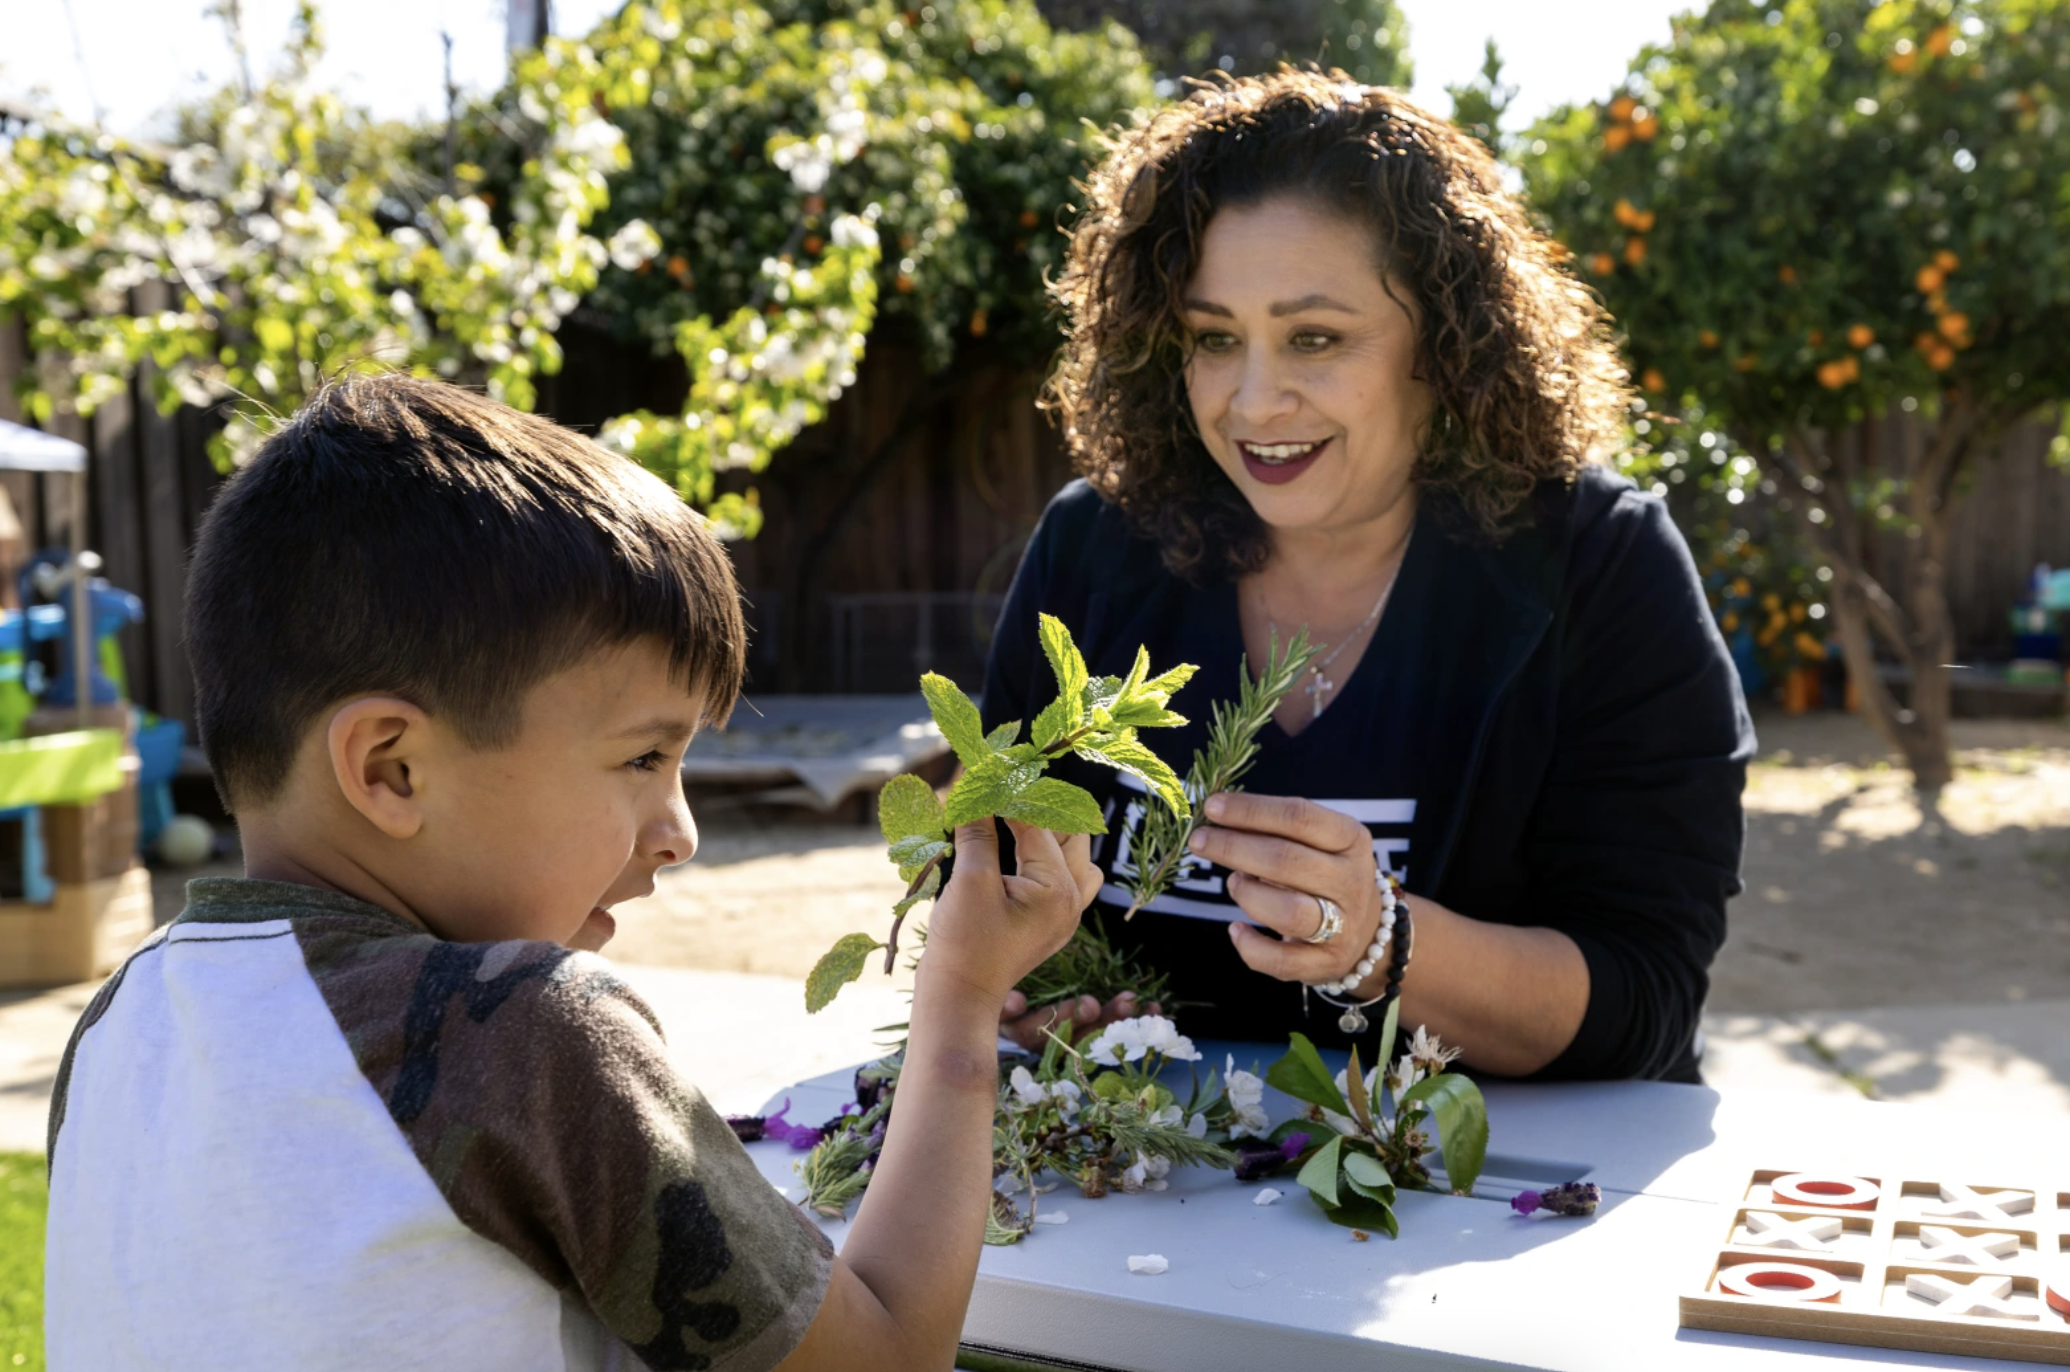 Woman helps boy make bouquet for his mother.